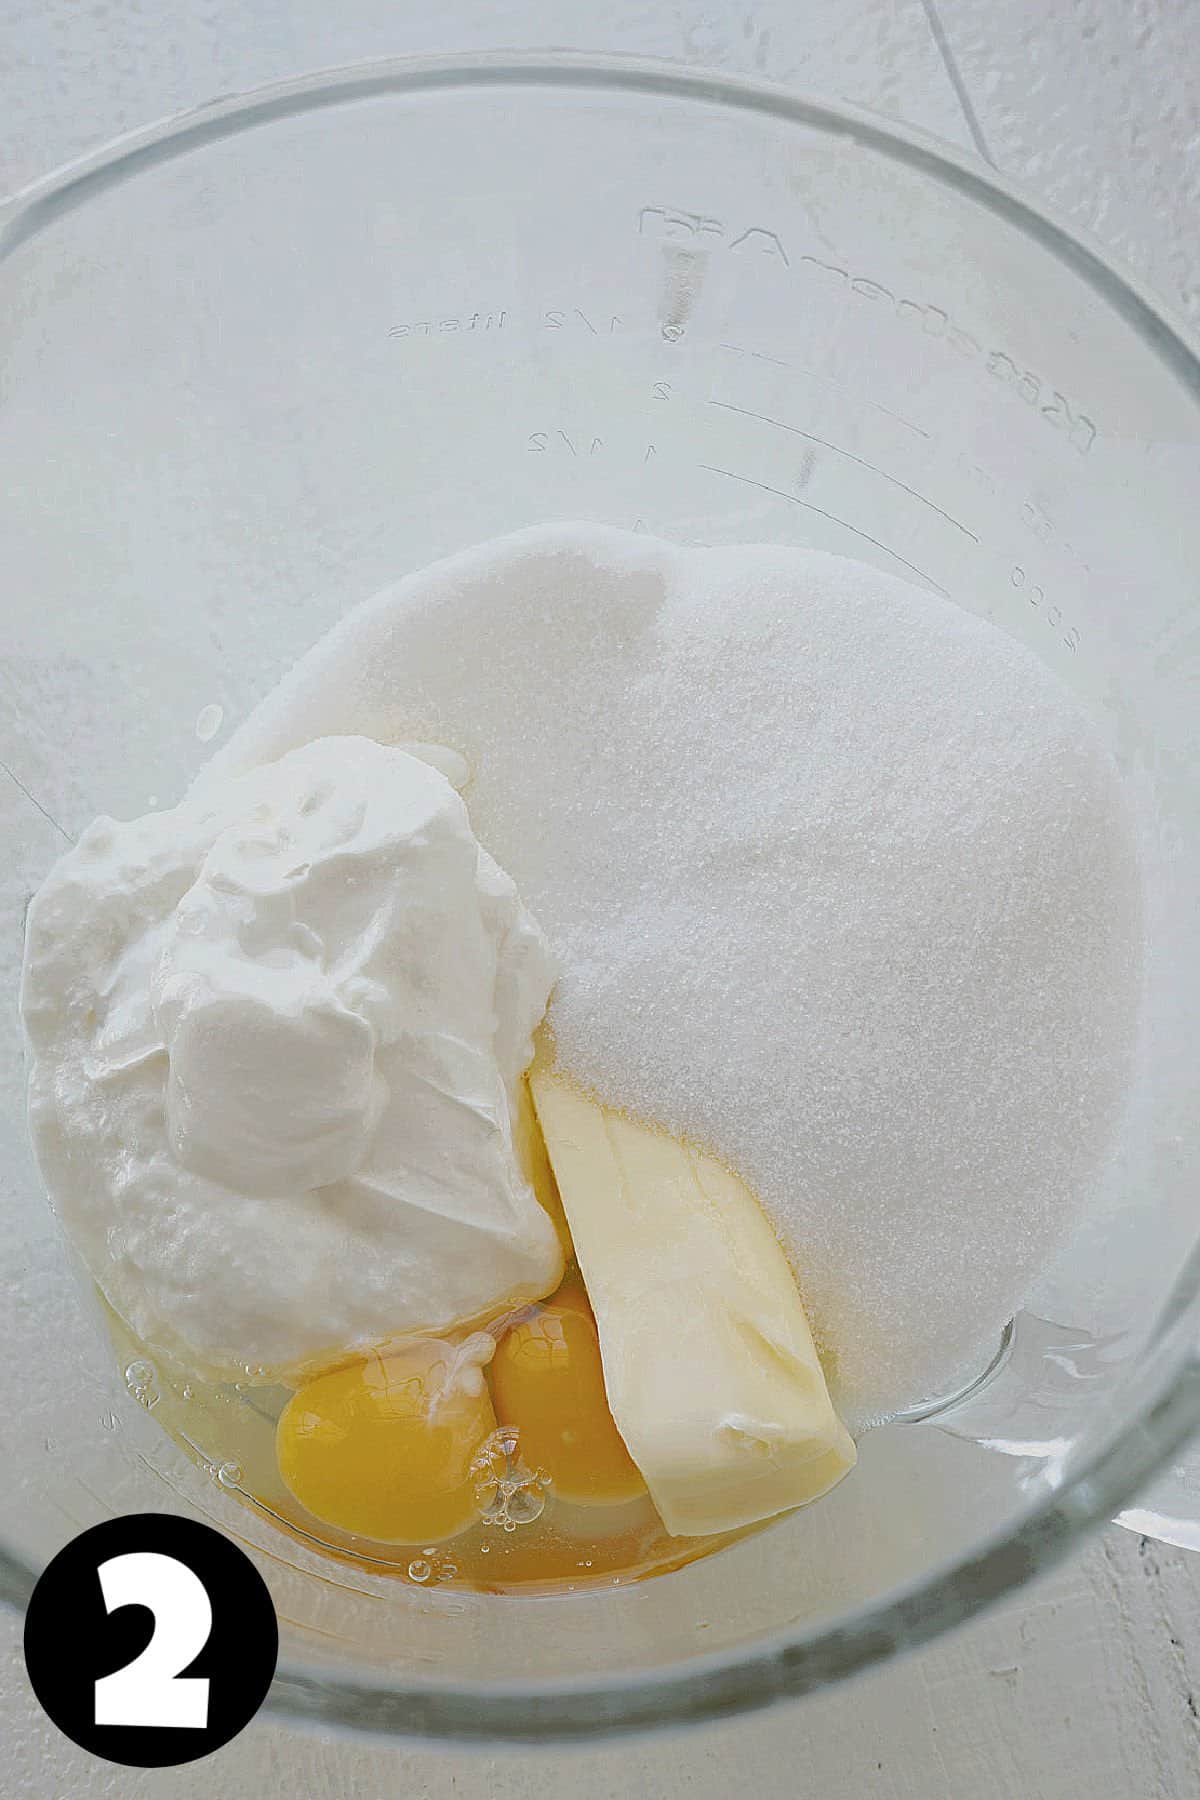 Sour cream, butter, eggs, and sugar in a mixing bowl.